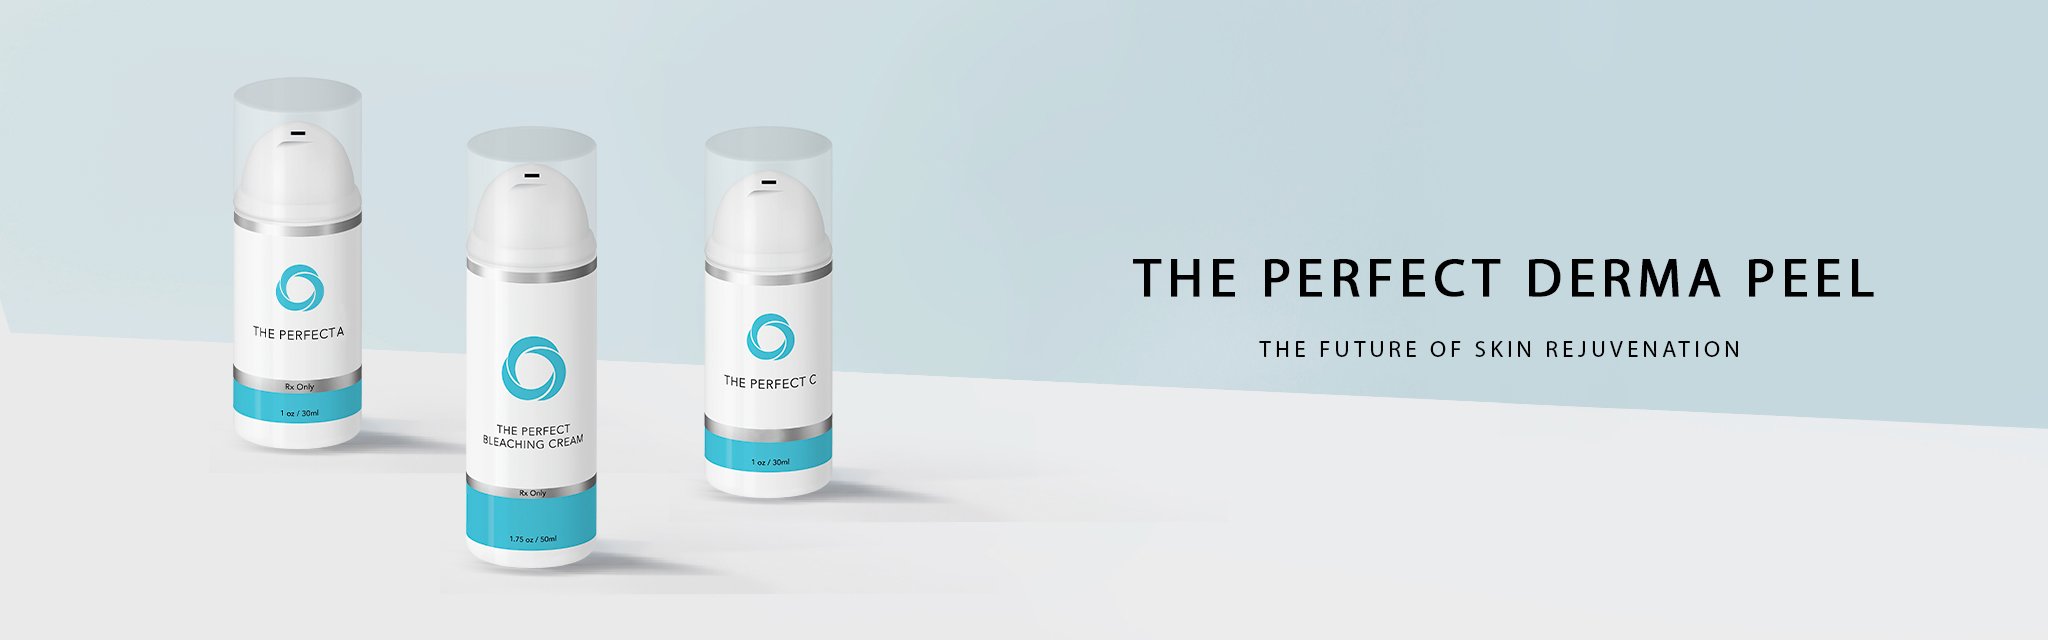 The Perfect Derma